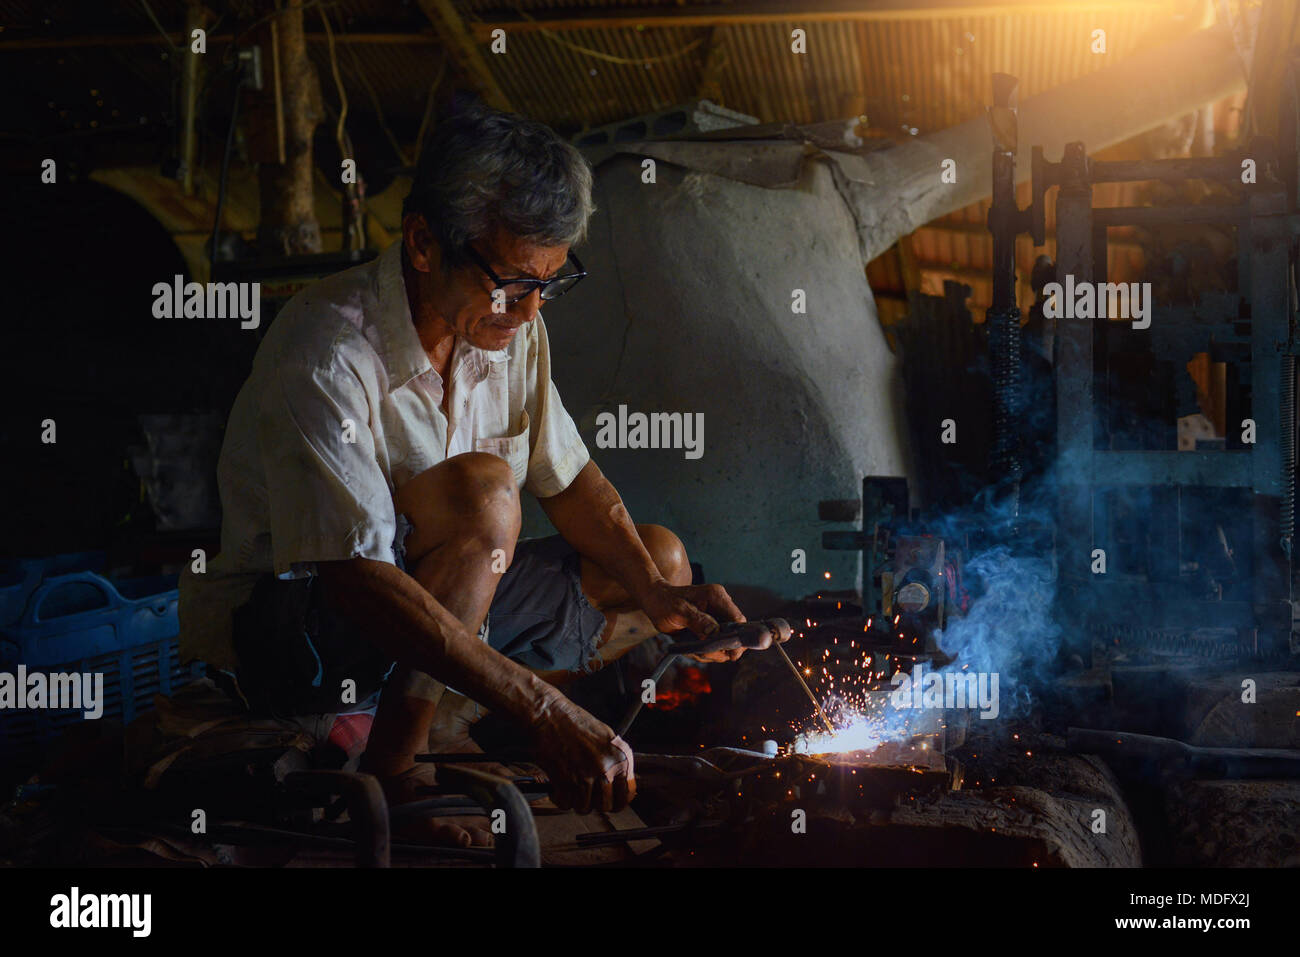 Metal worker in a steel factory, Thailand Stock Photo